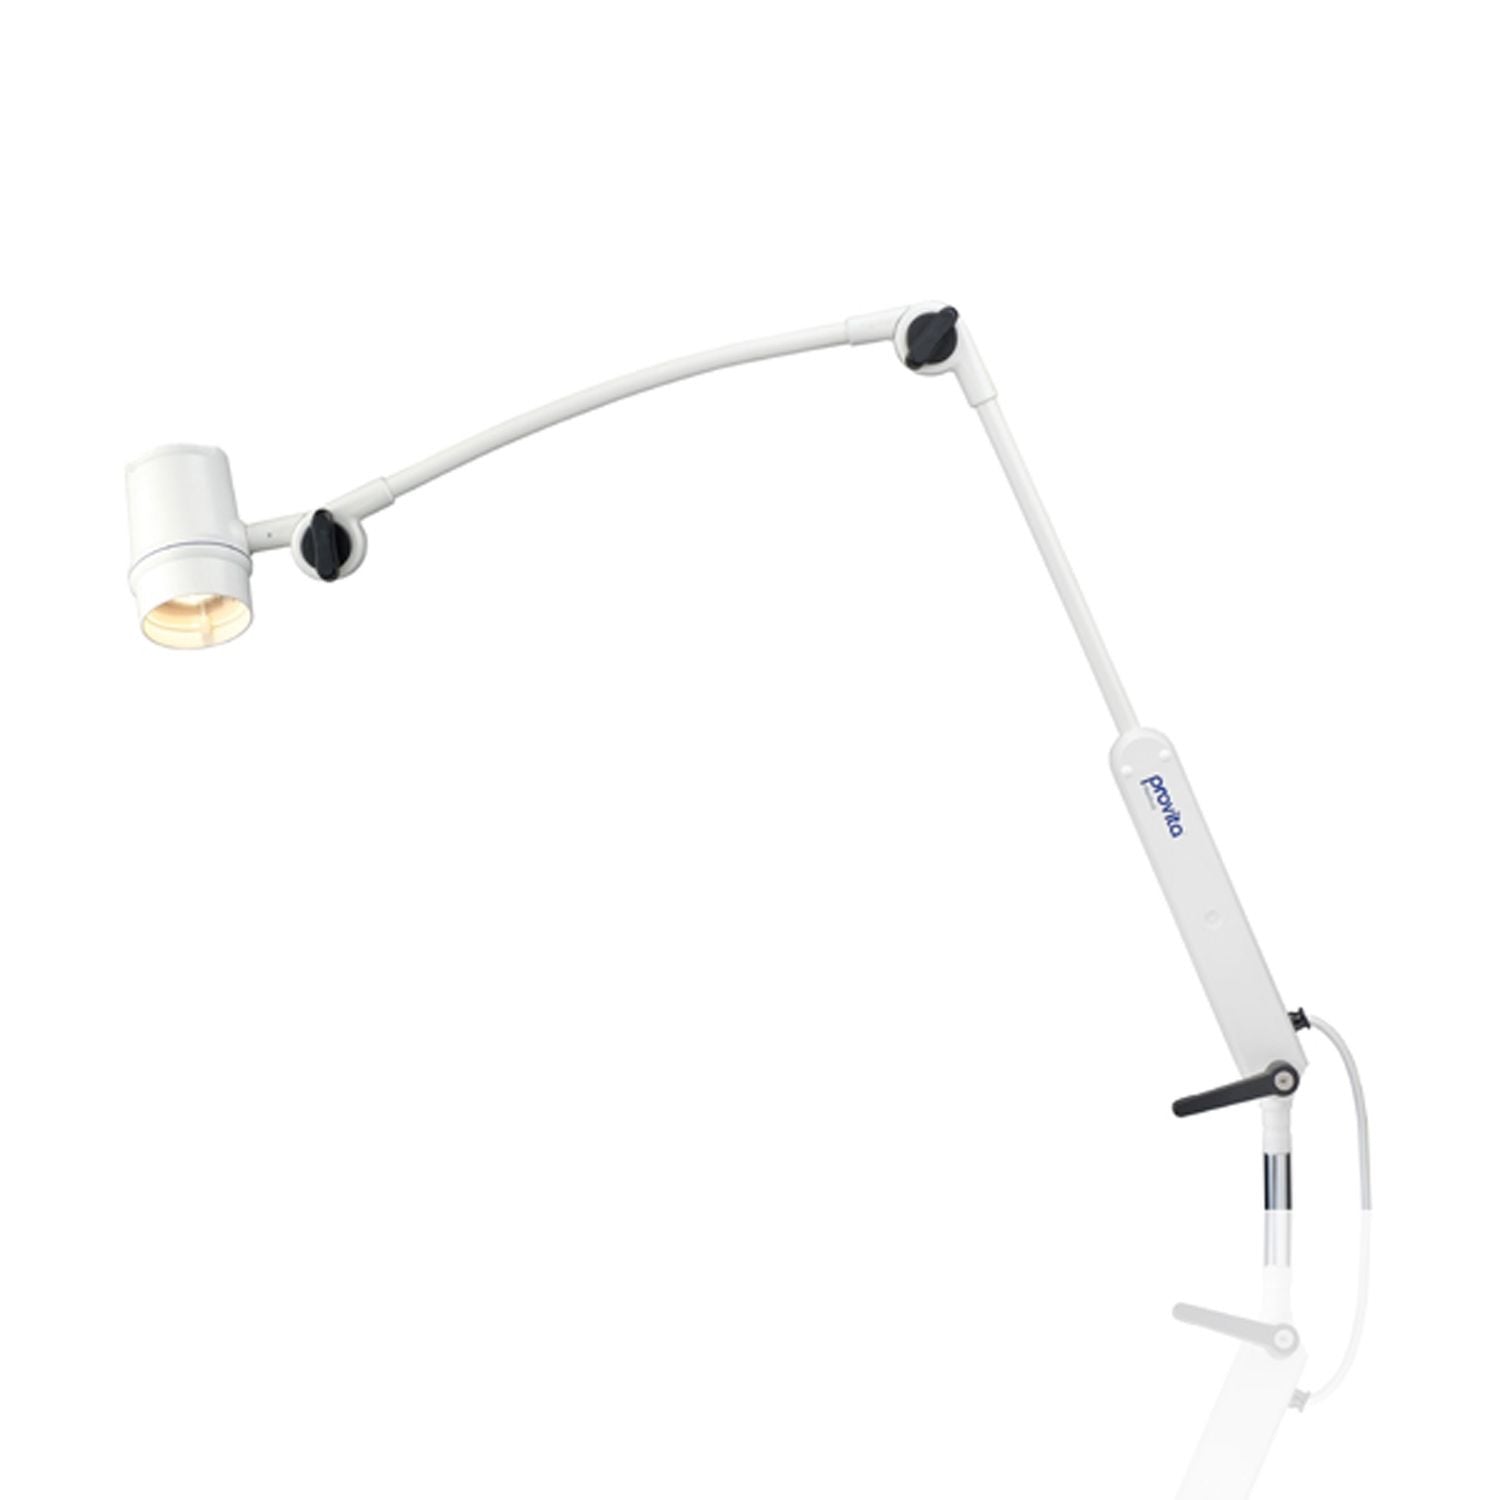 Provita 35w Examination Lamp with One Single Joint Arm